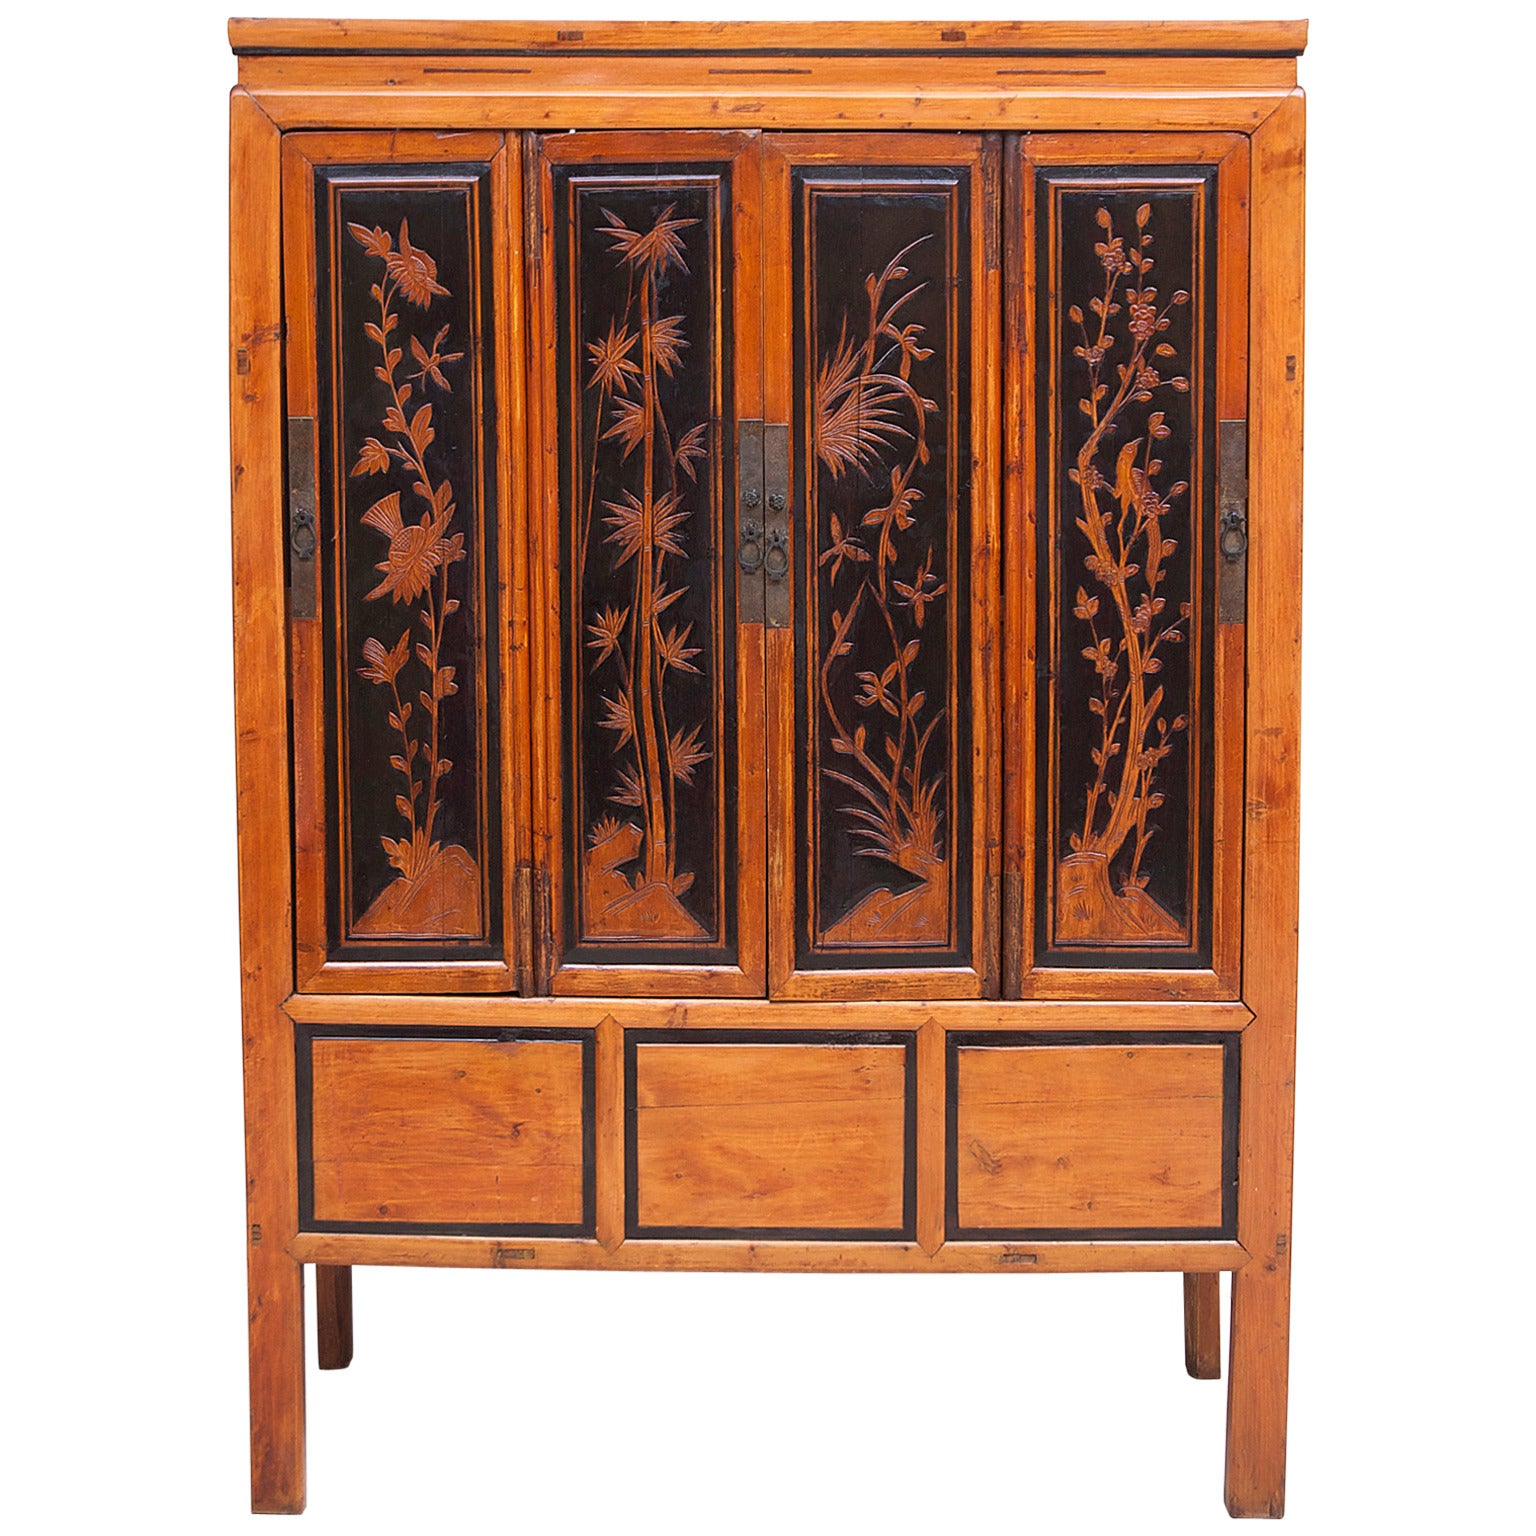 A lovely Chinese cabinet in elm with four doors whose panels show a carved scene of vegetation representing each of the four seasons in relief. The amber color of the wood, as well as the cabinet's architecture & scenes are enhanced by the ebonized